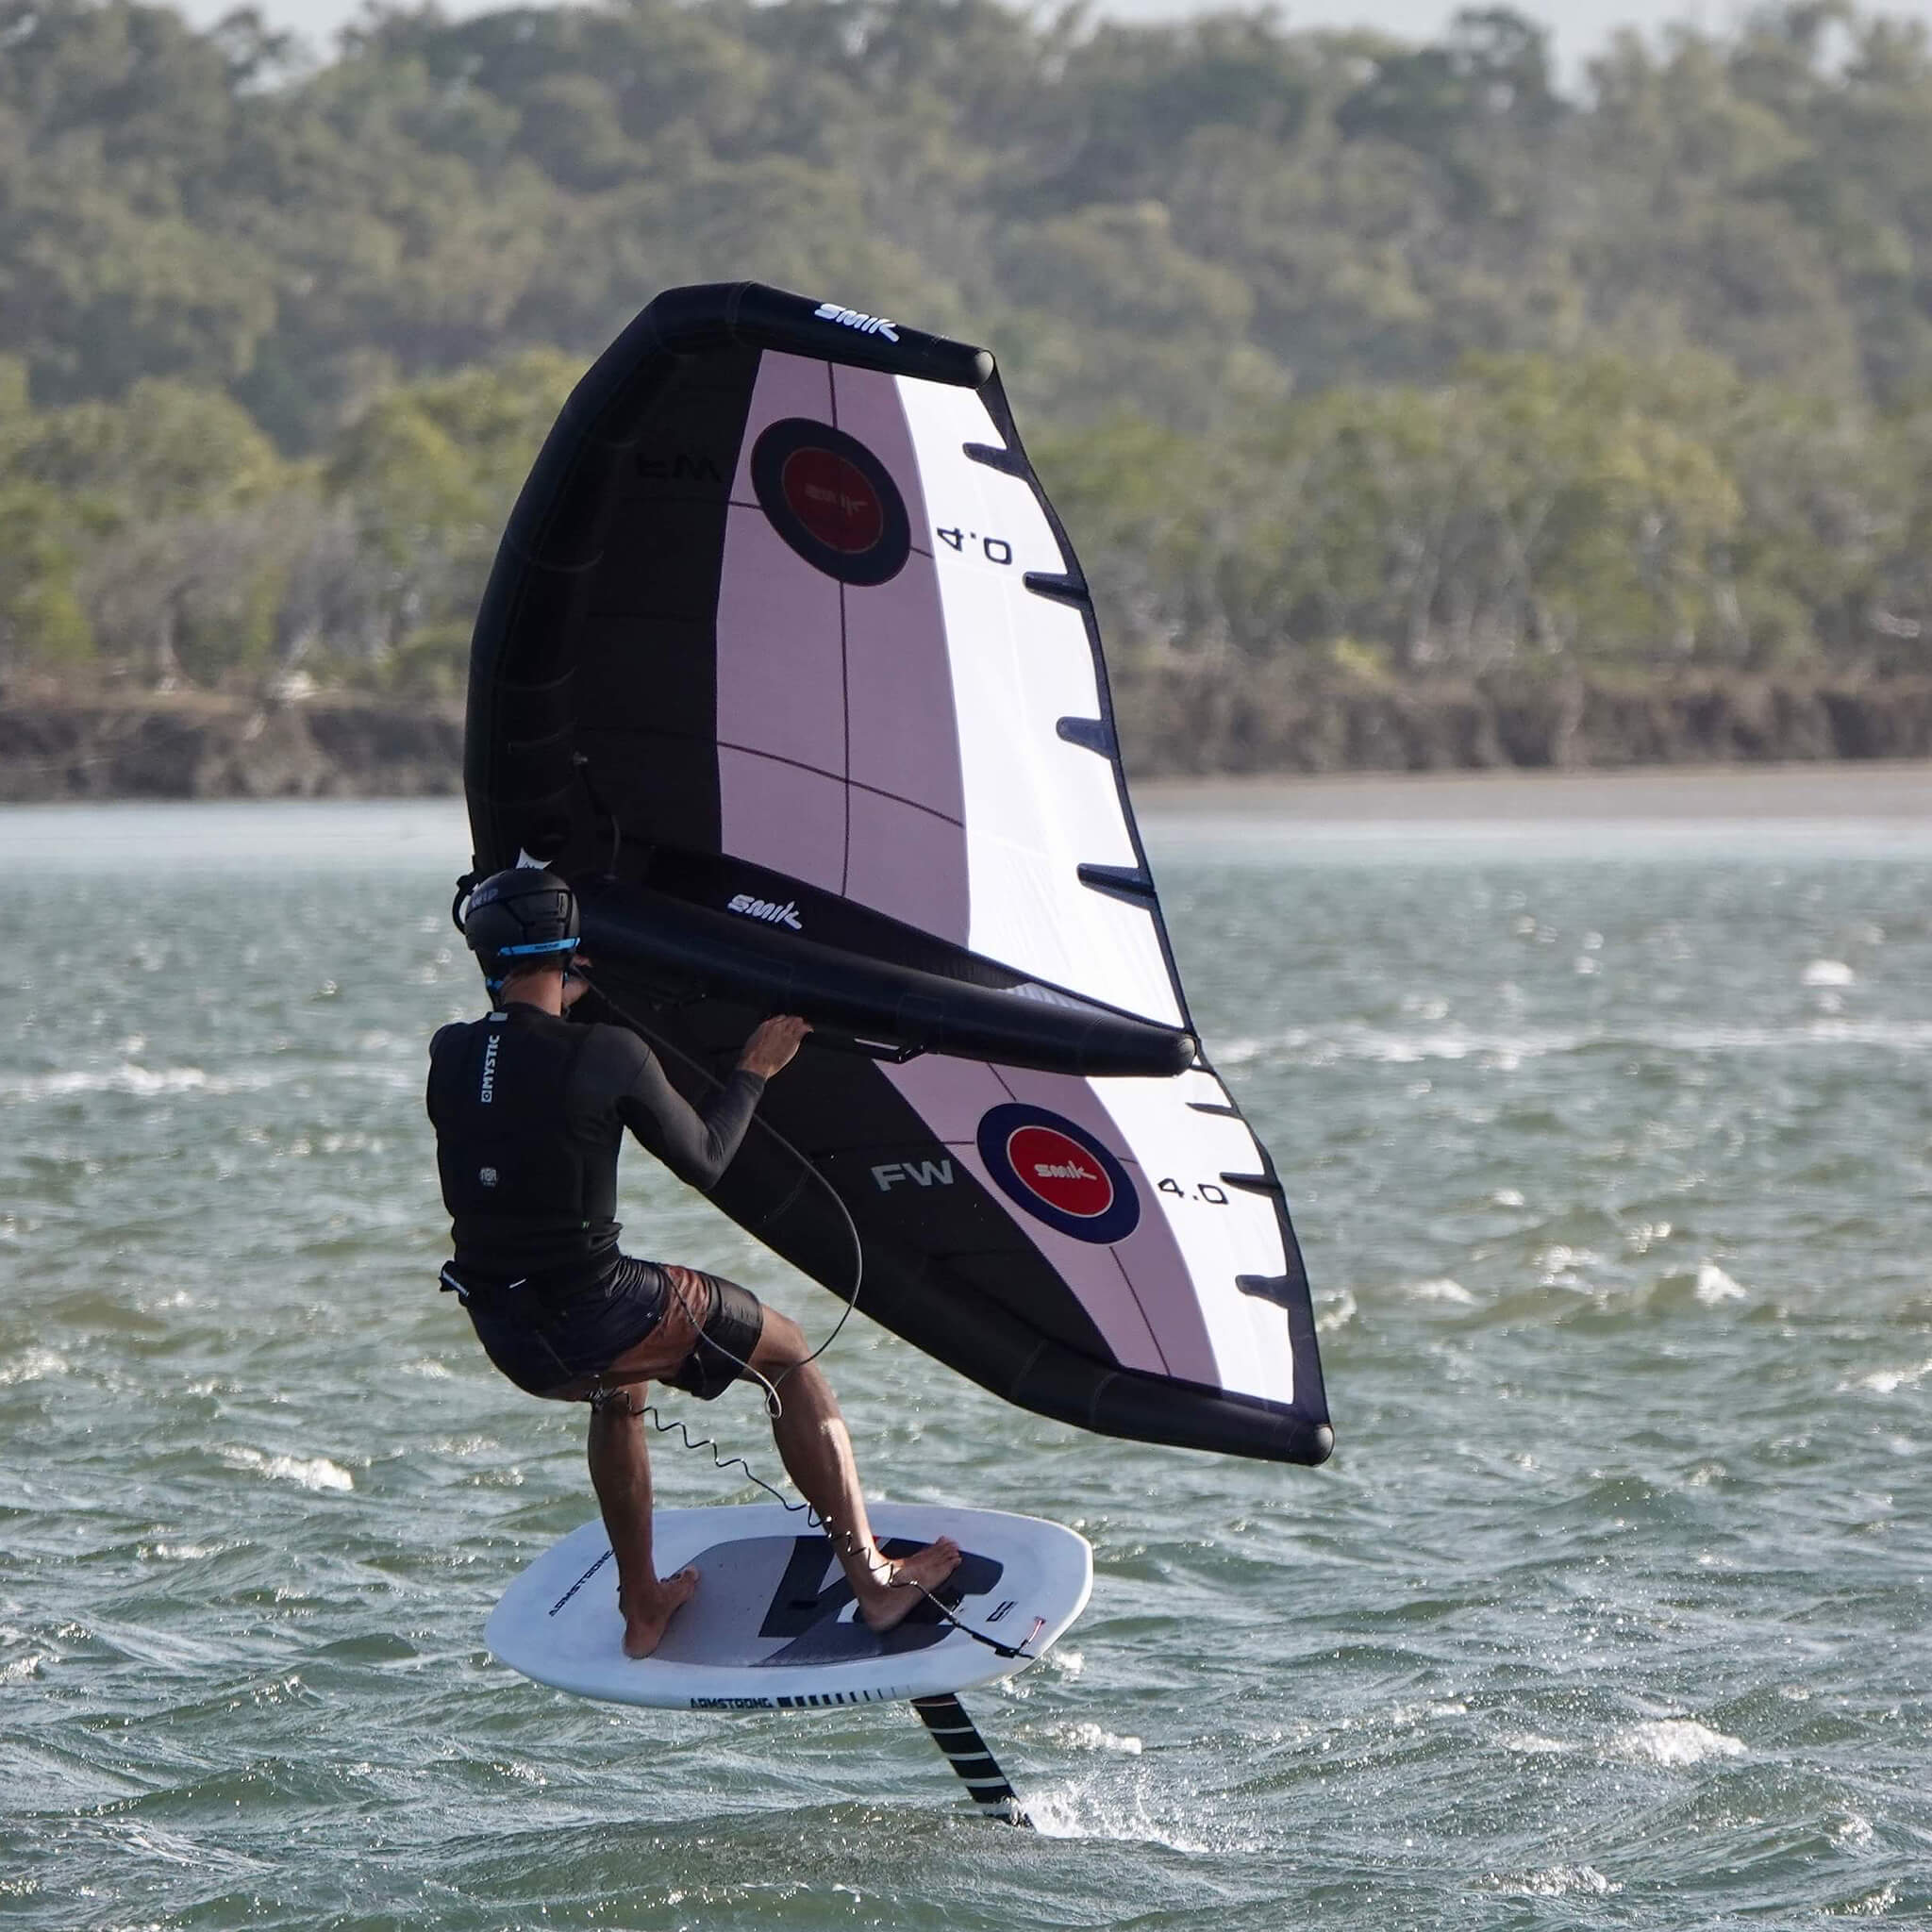 winger at elliot heads QLD riding smik wing & armstrong foil